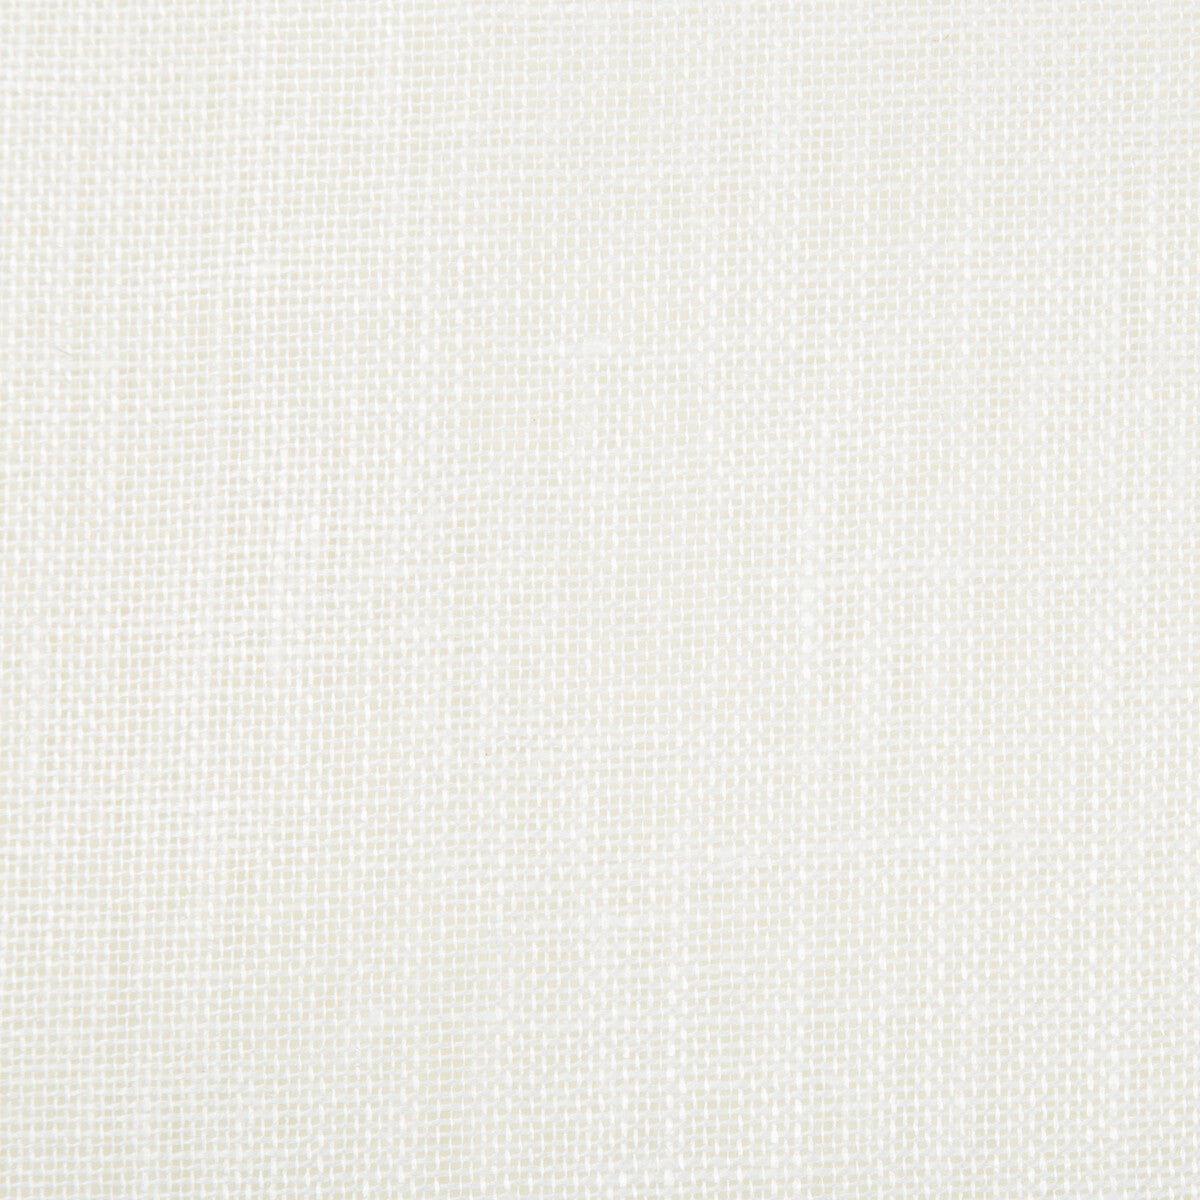 Lynette fabric in white color - pattern 8014135.101.0 - by Brunschwig &amp; Fils